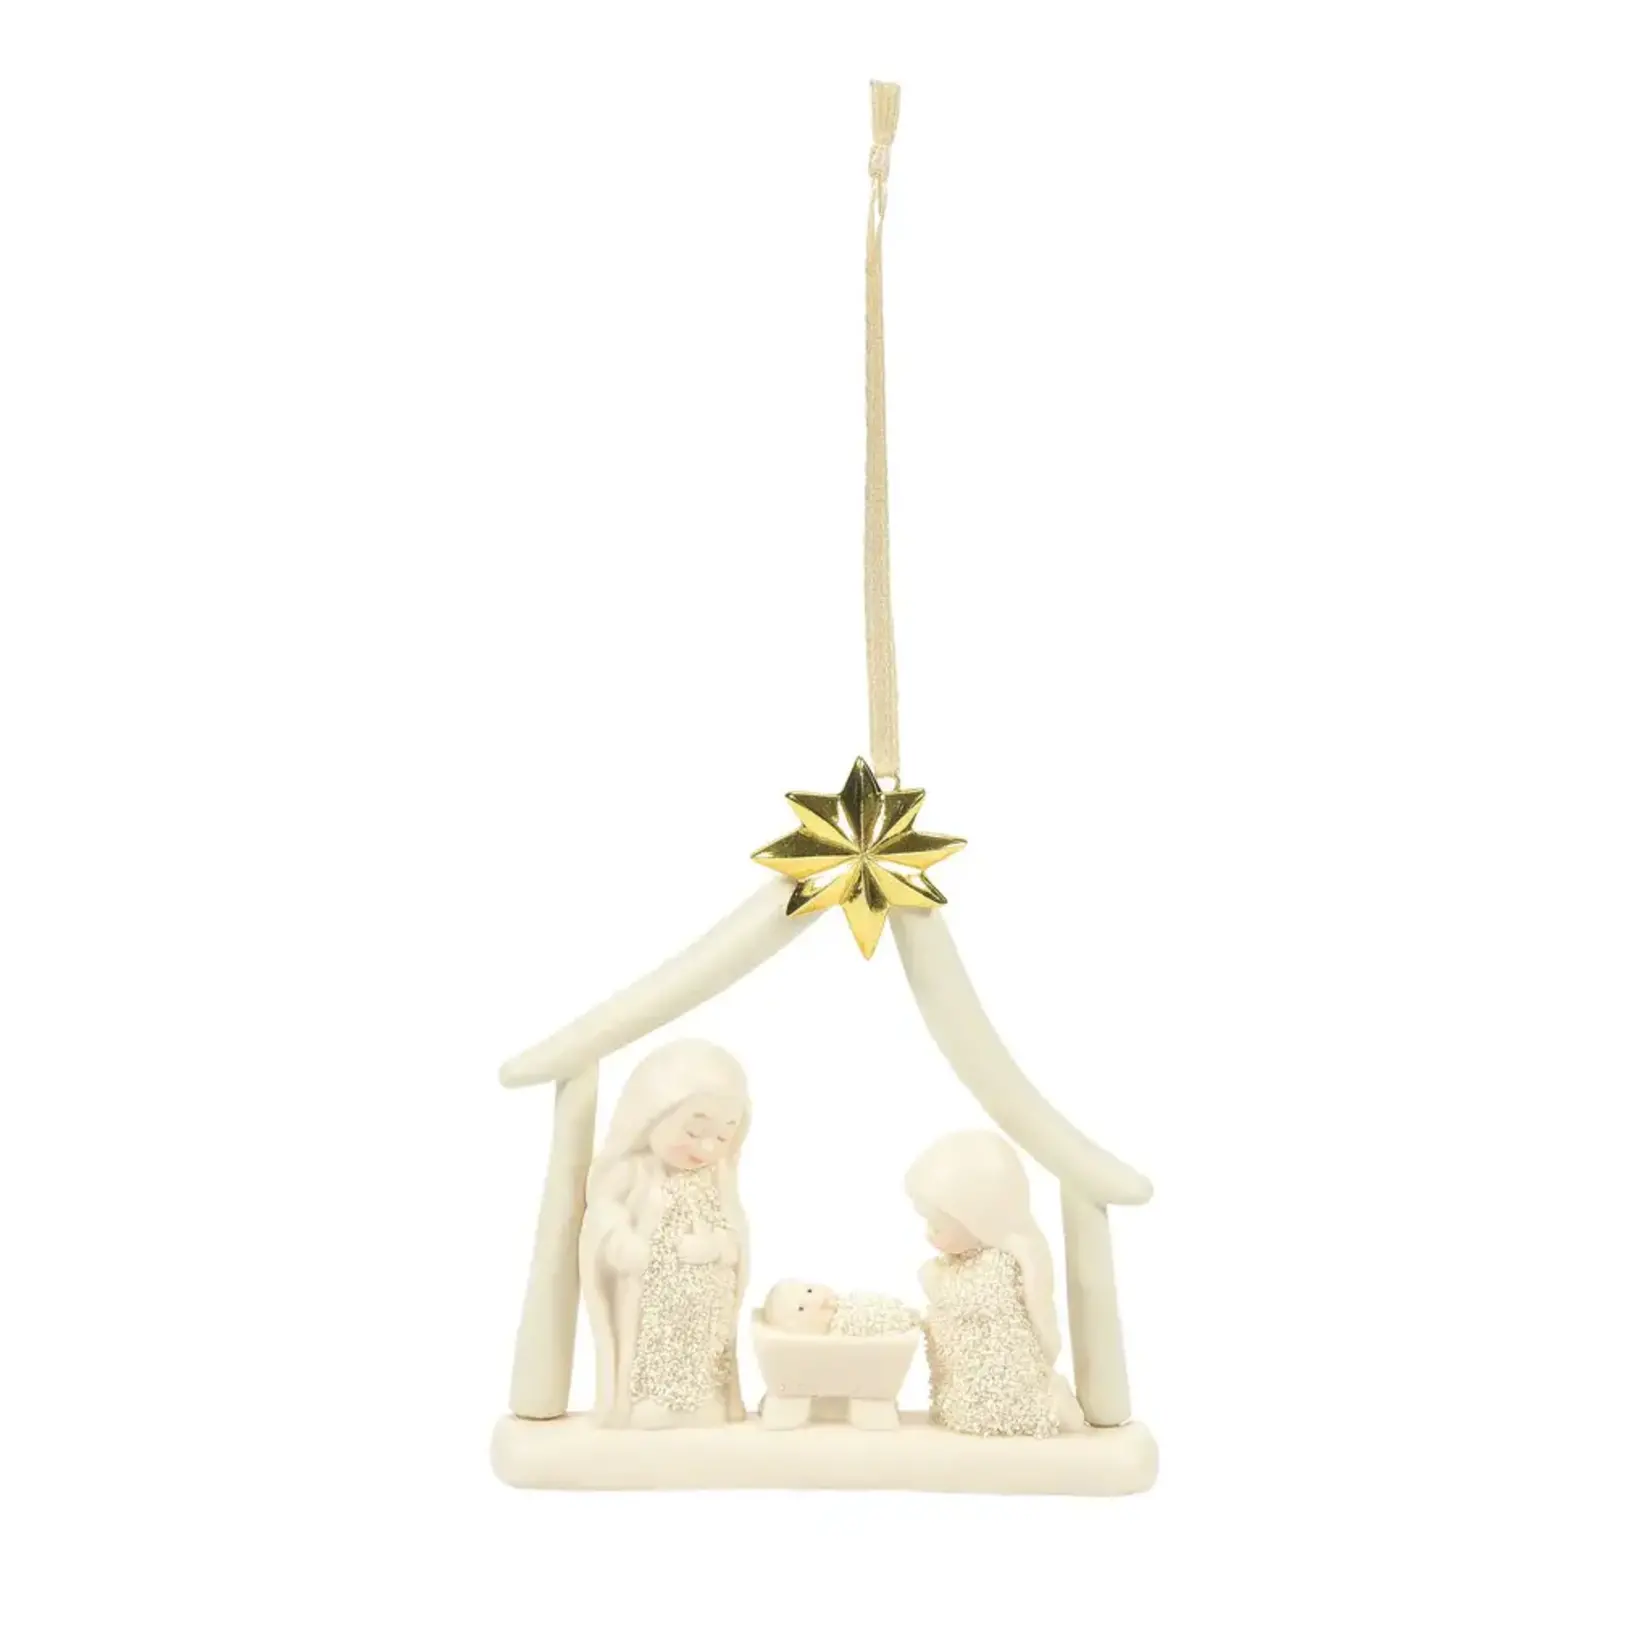 Department 56 Ornament Snowbabies - The Holy Family Nativity